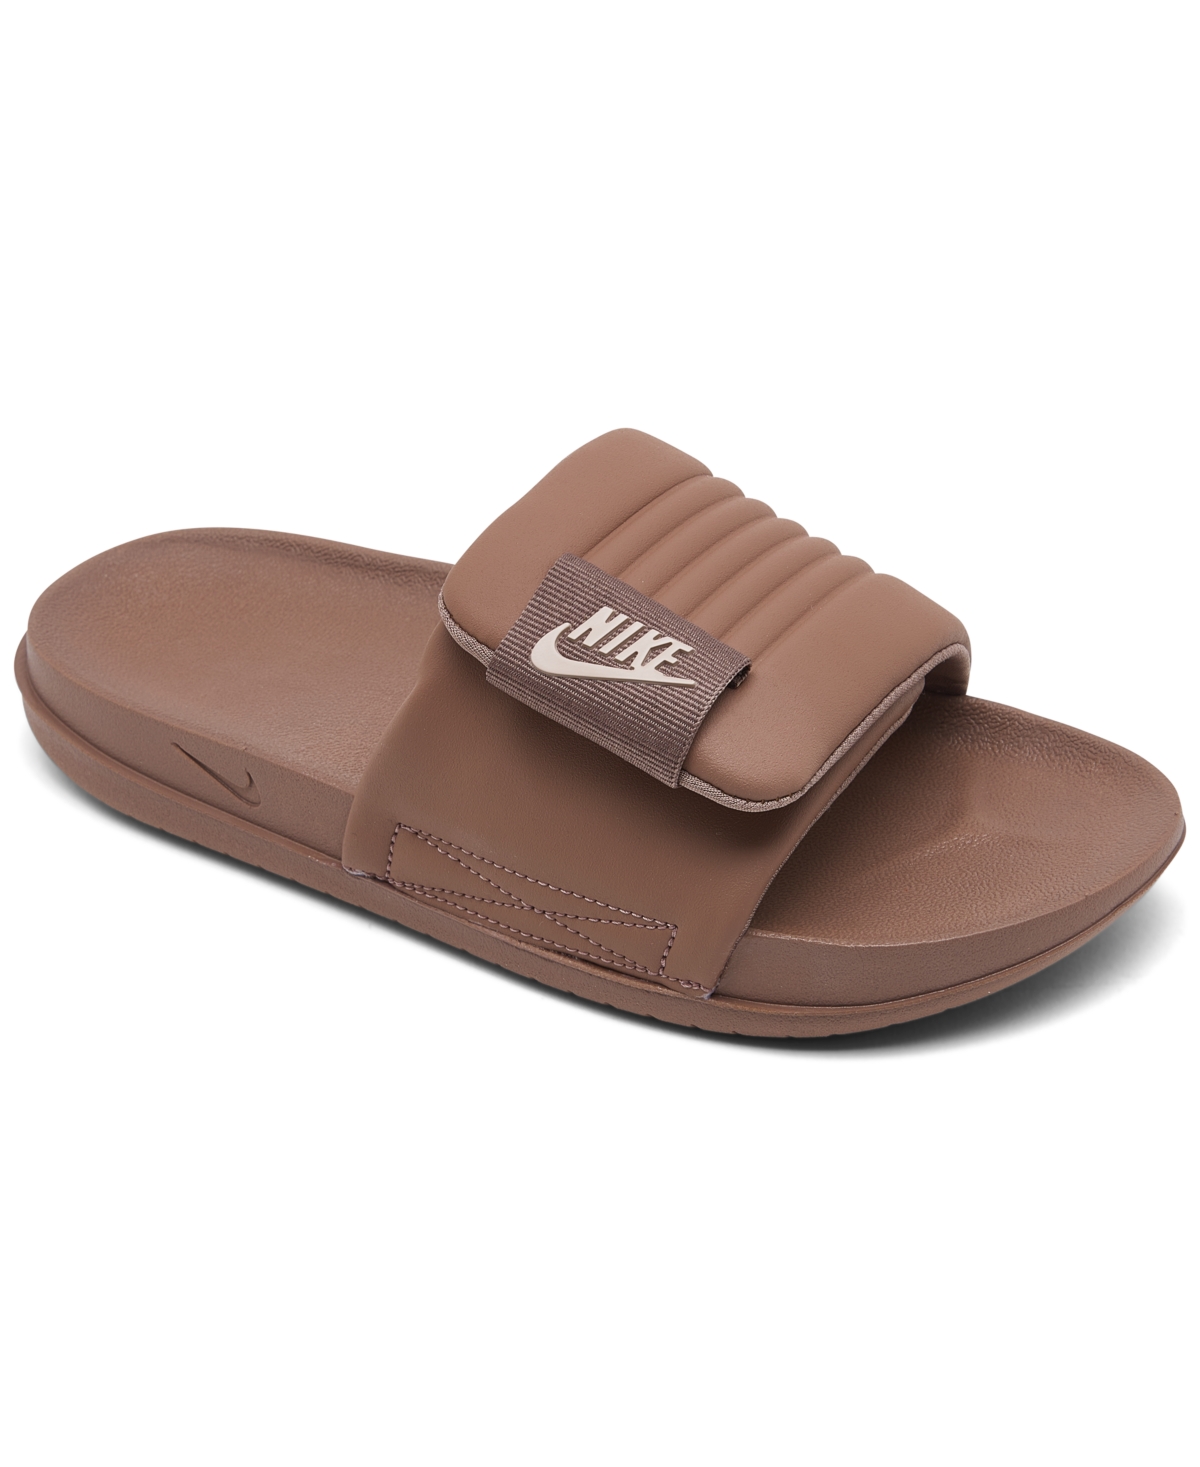 Shop Nike Women's Offcourt Adjust Slide Sandals From Finish Line In Smokey Mauve,diffused Tau